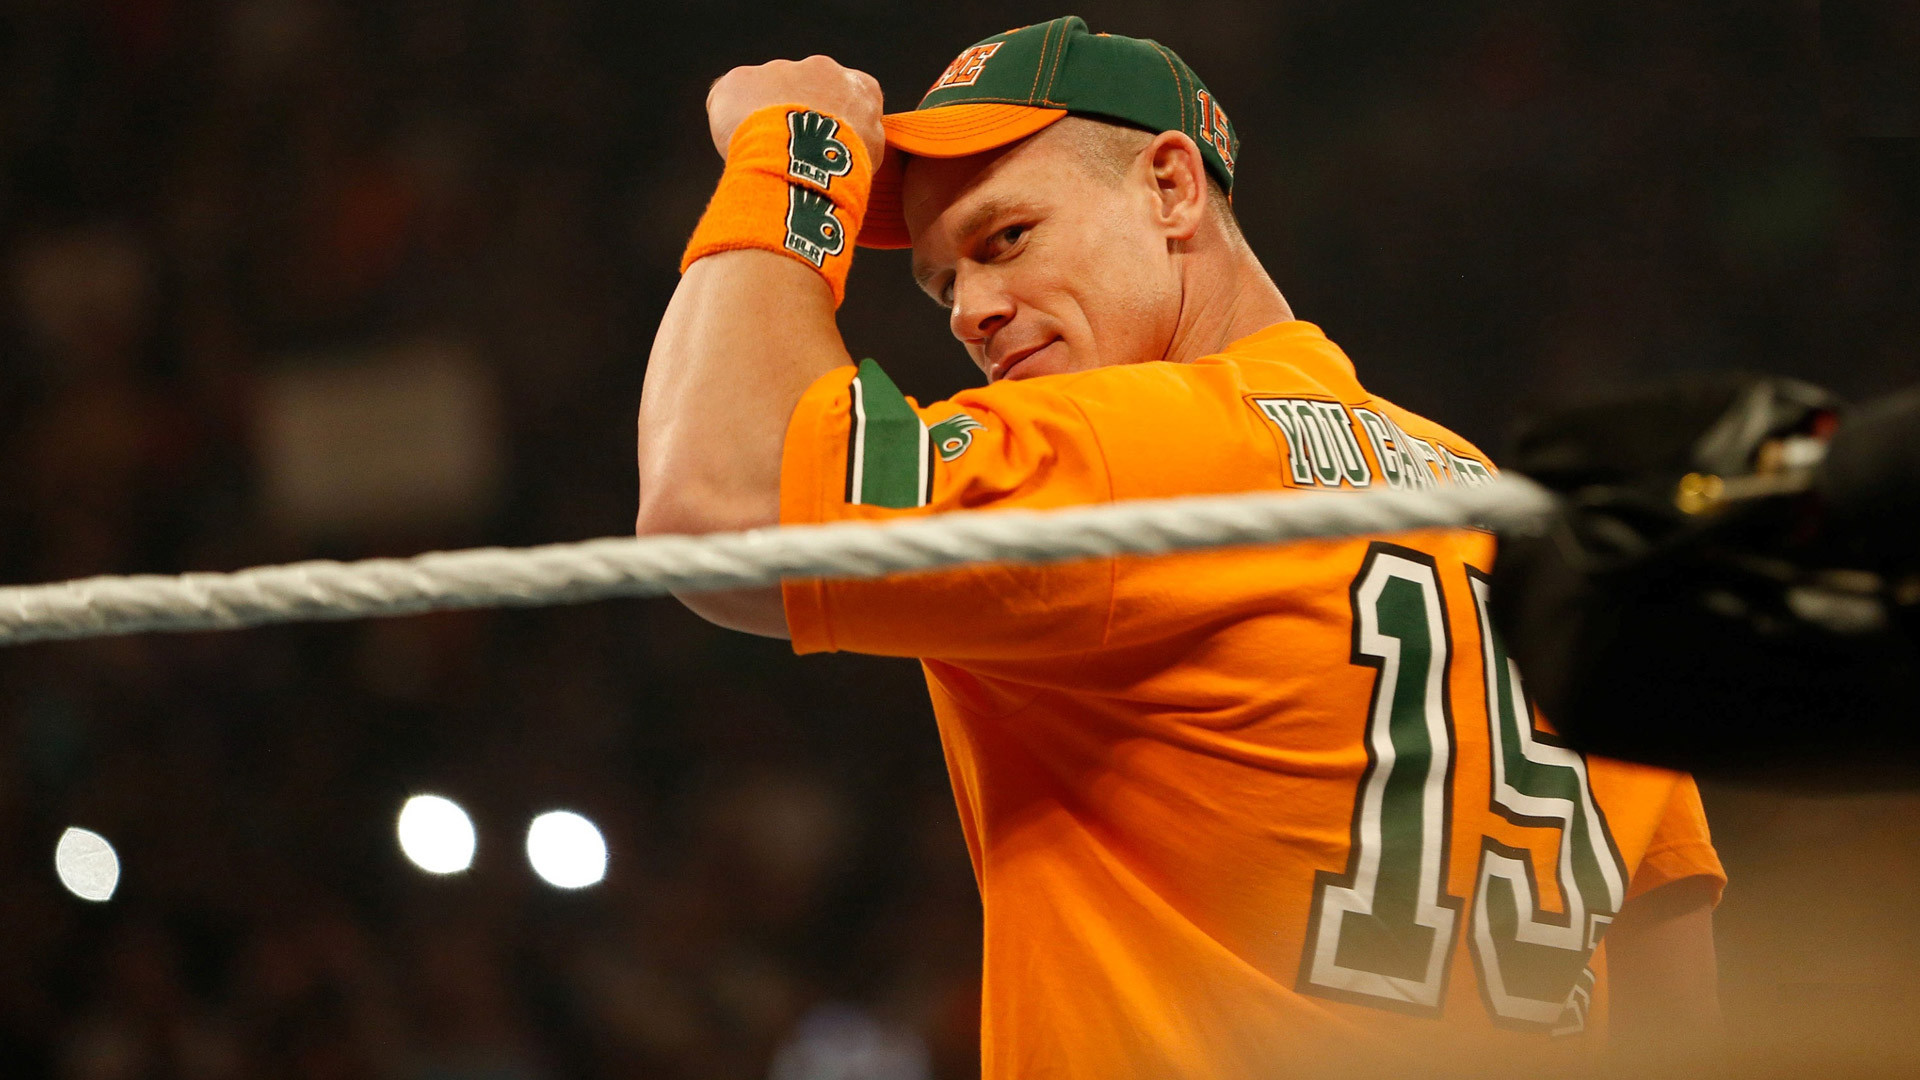 1920x1080 John Cena Wallpapers, Pictures, Images.